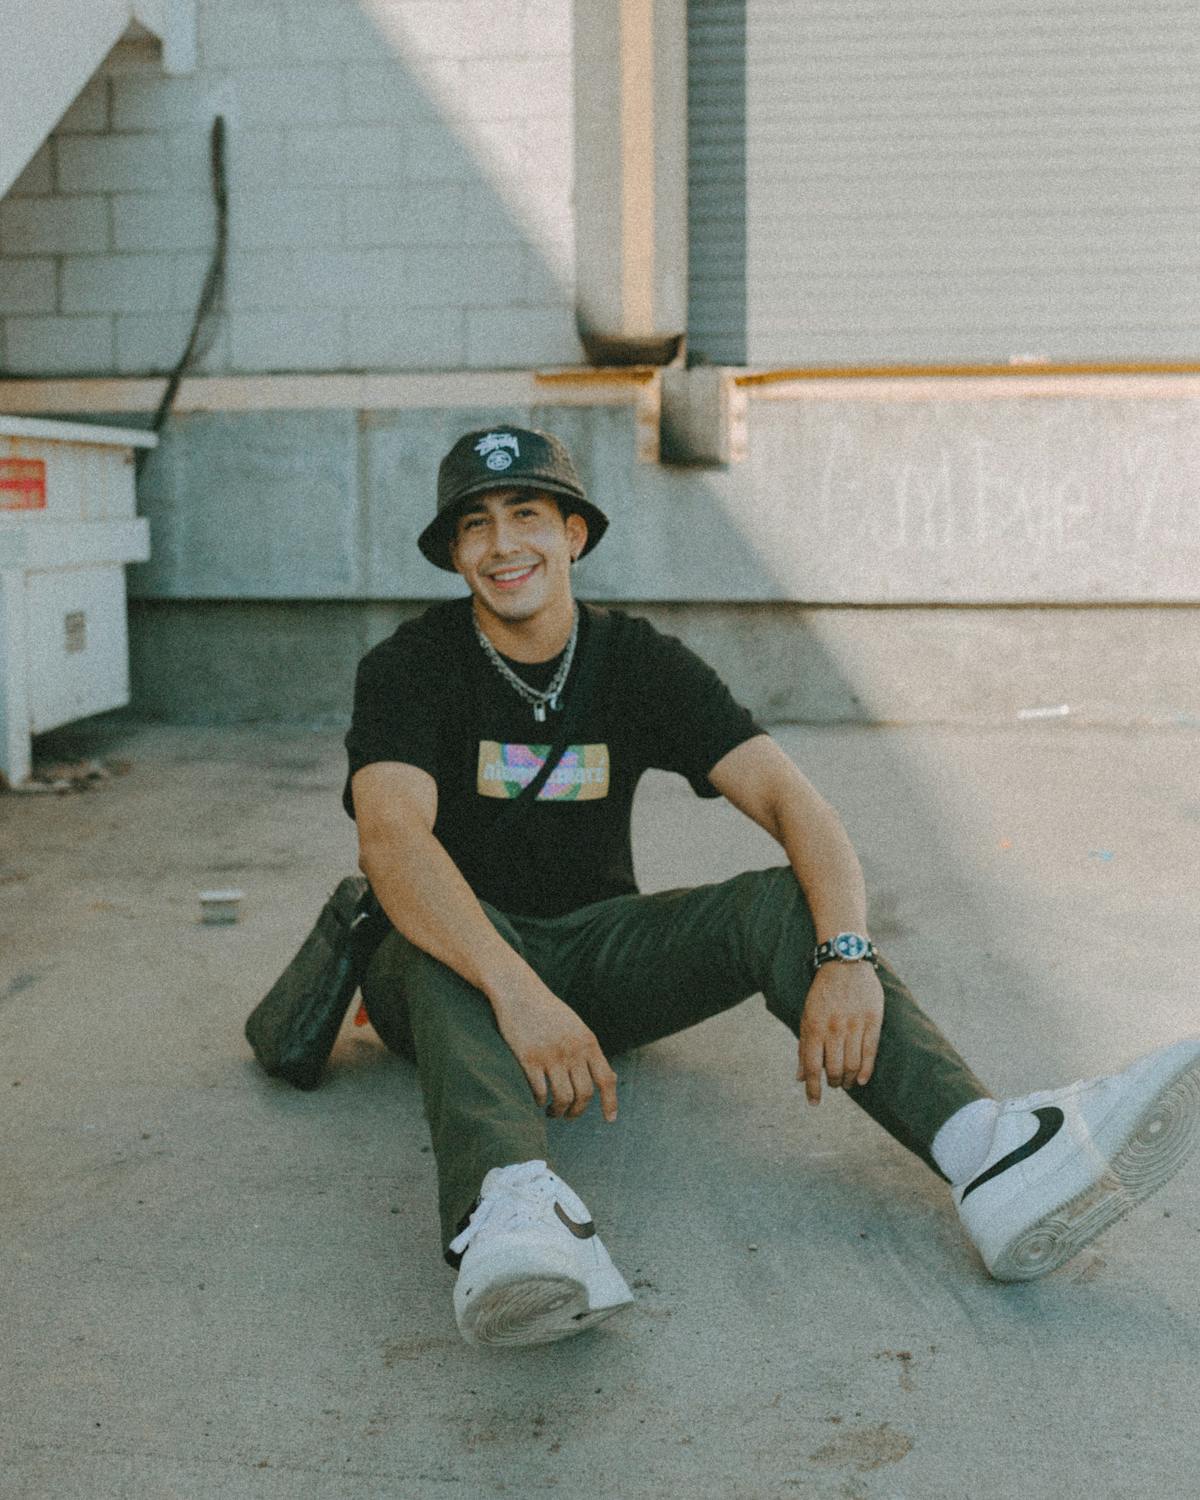 young man sitting on the ground in street fahsion clothes and a bucket hat smiling